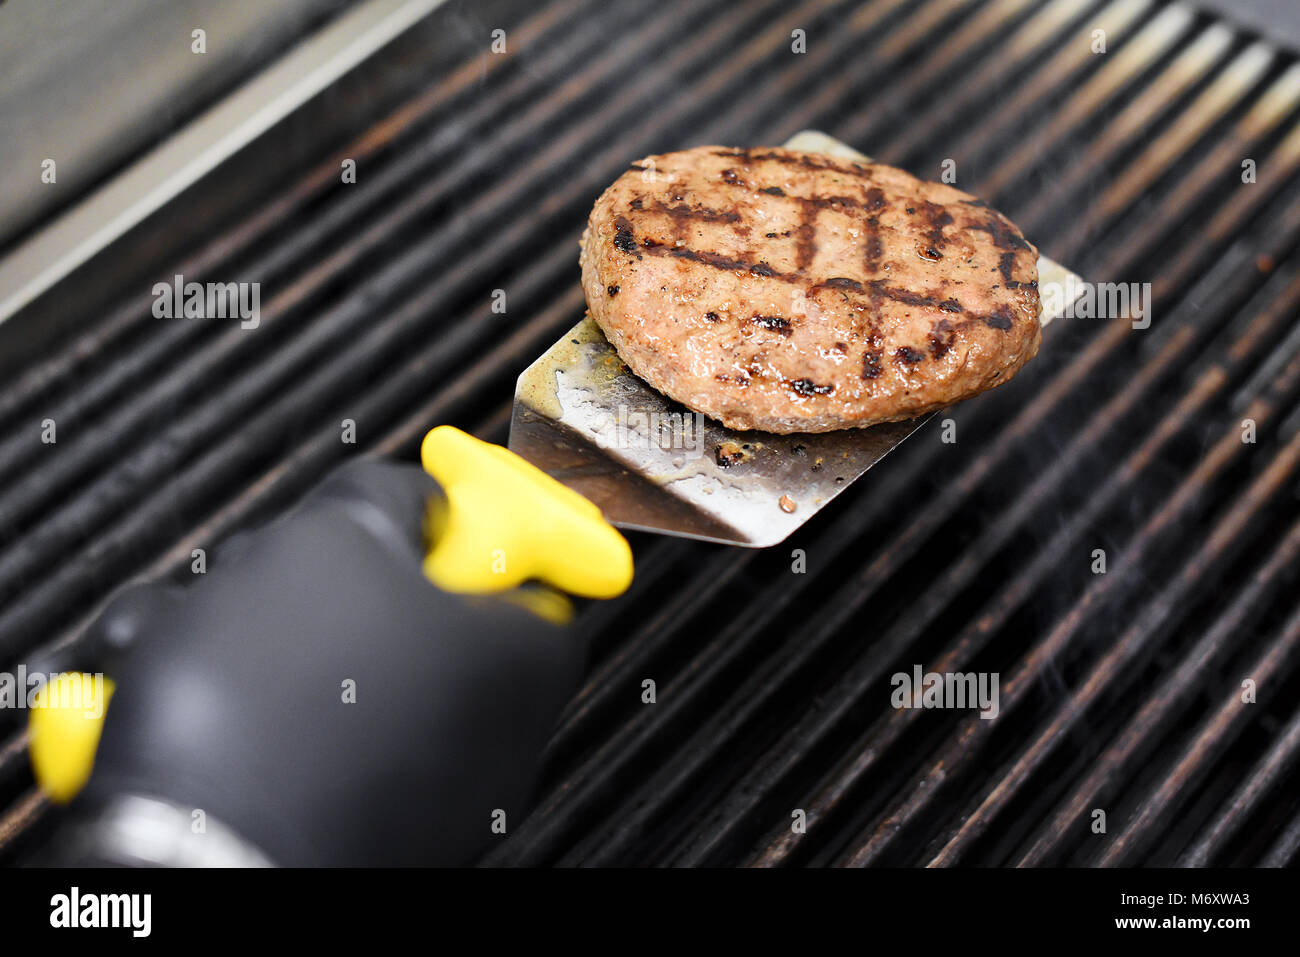 https://c8.alamy.com/comp/M6XWA3/chef-cooking-a-hamburger-patty-on-an-electric-grill-or-griddle-turning-M6XWA3.jpg